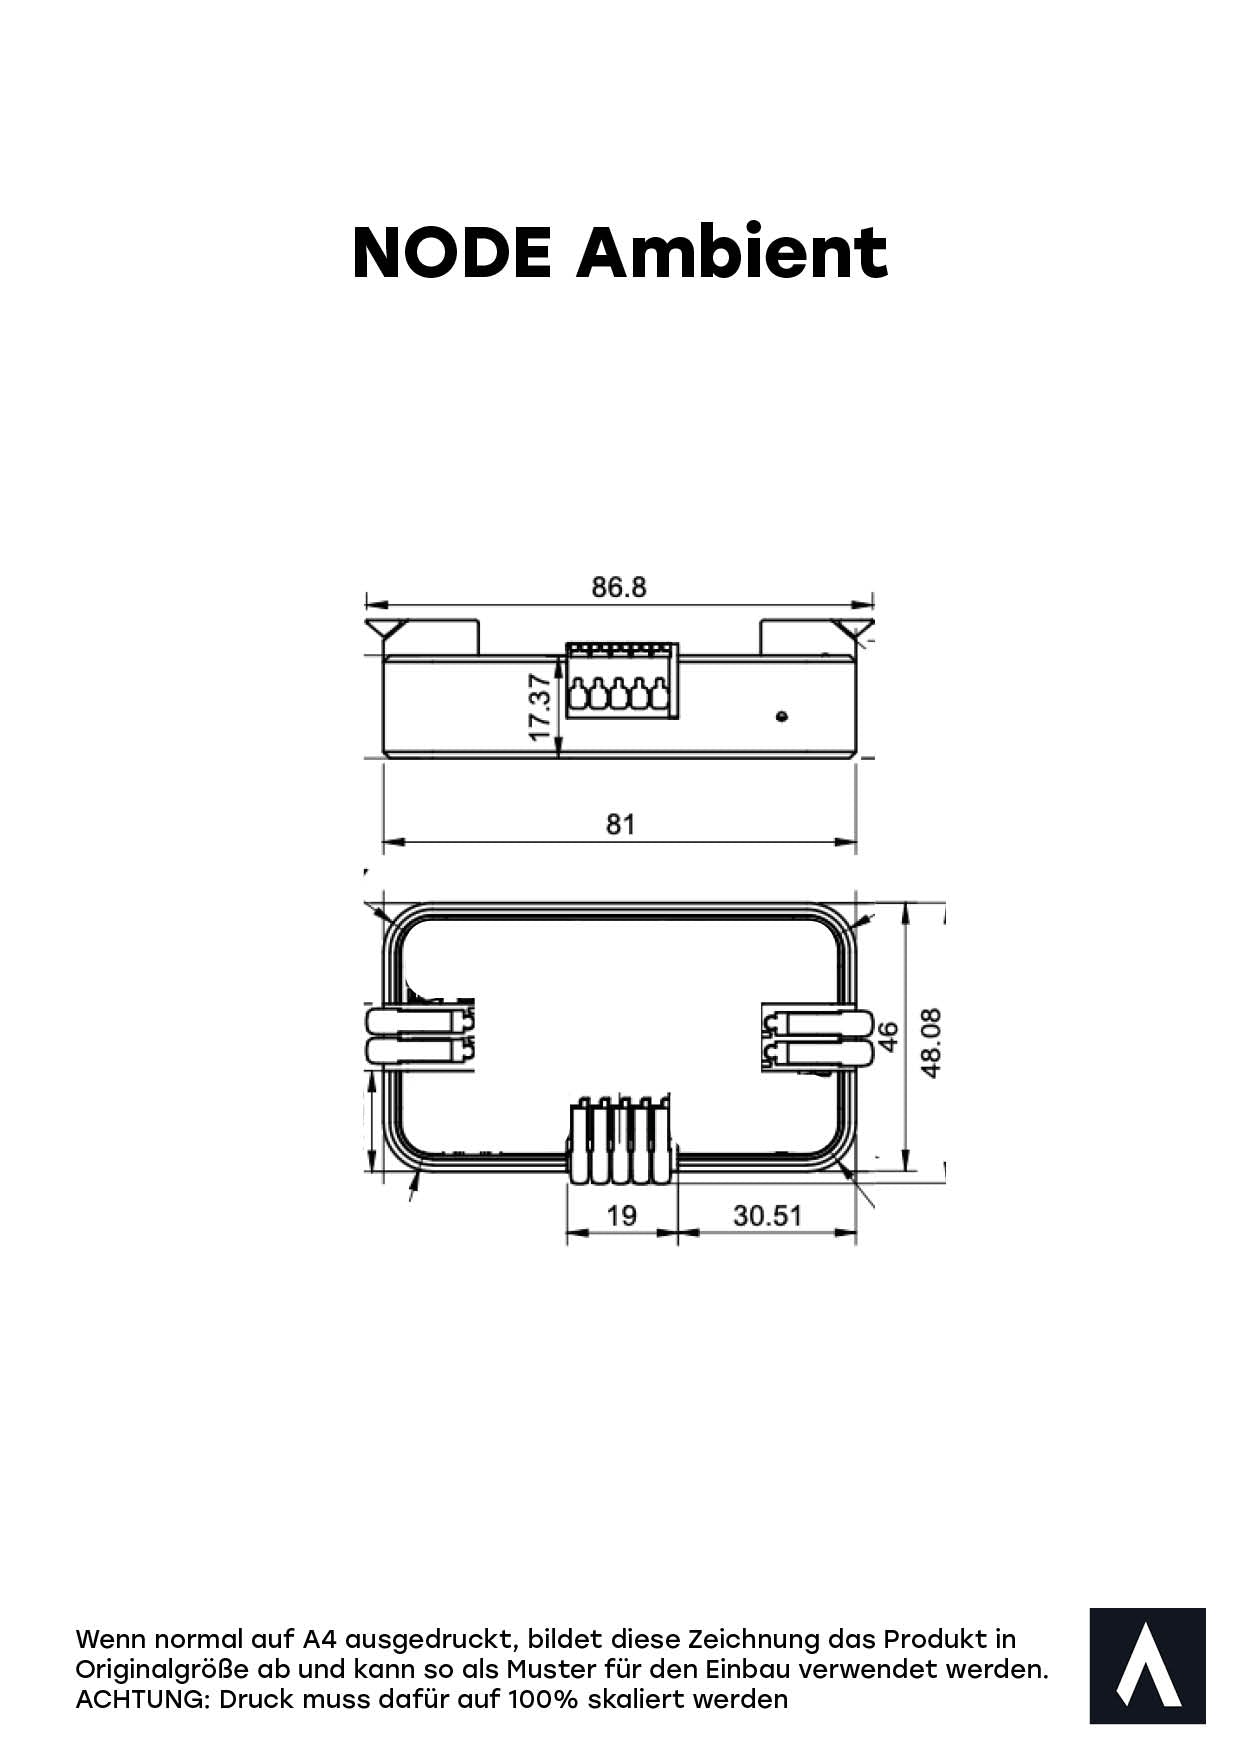 Technical Drawing as print template for revotion node ambient